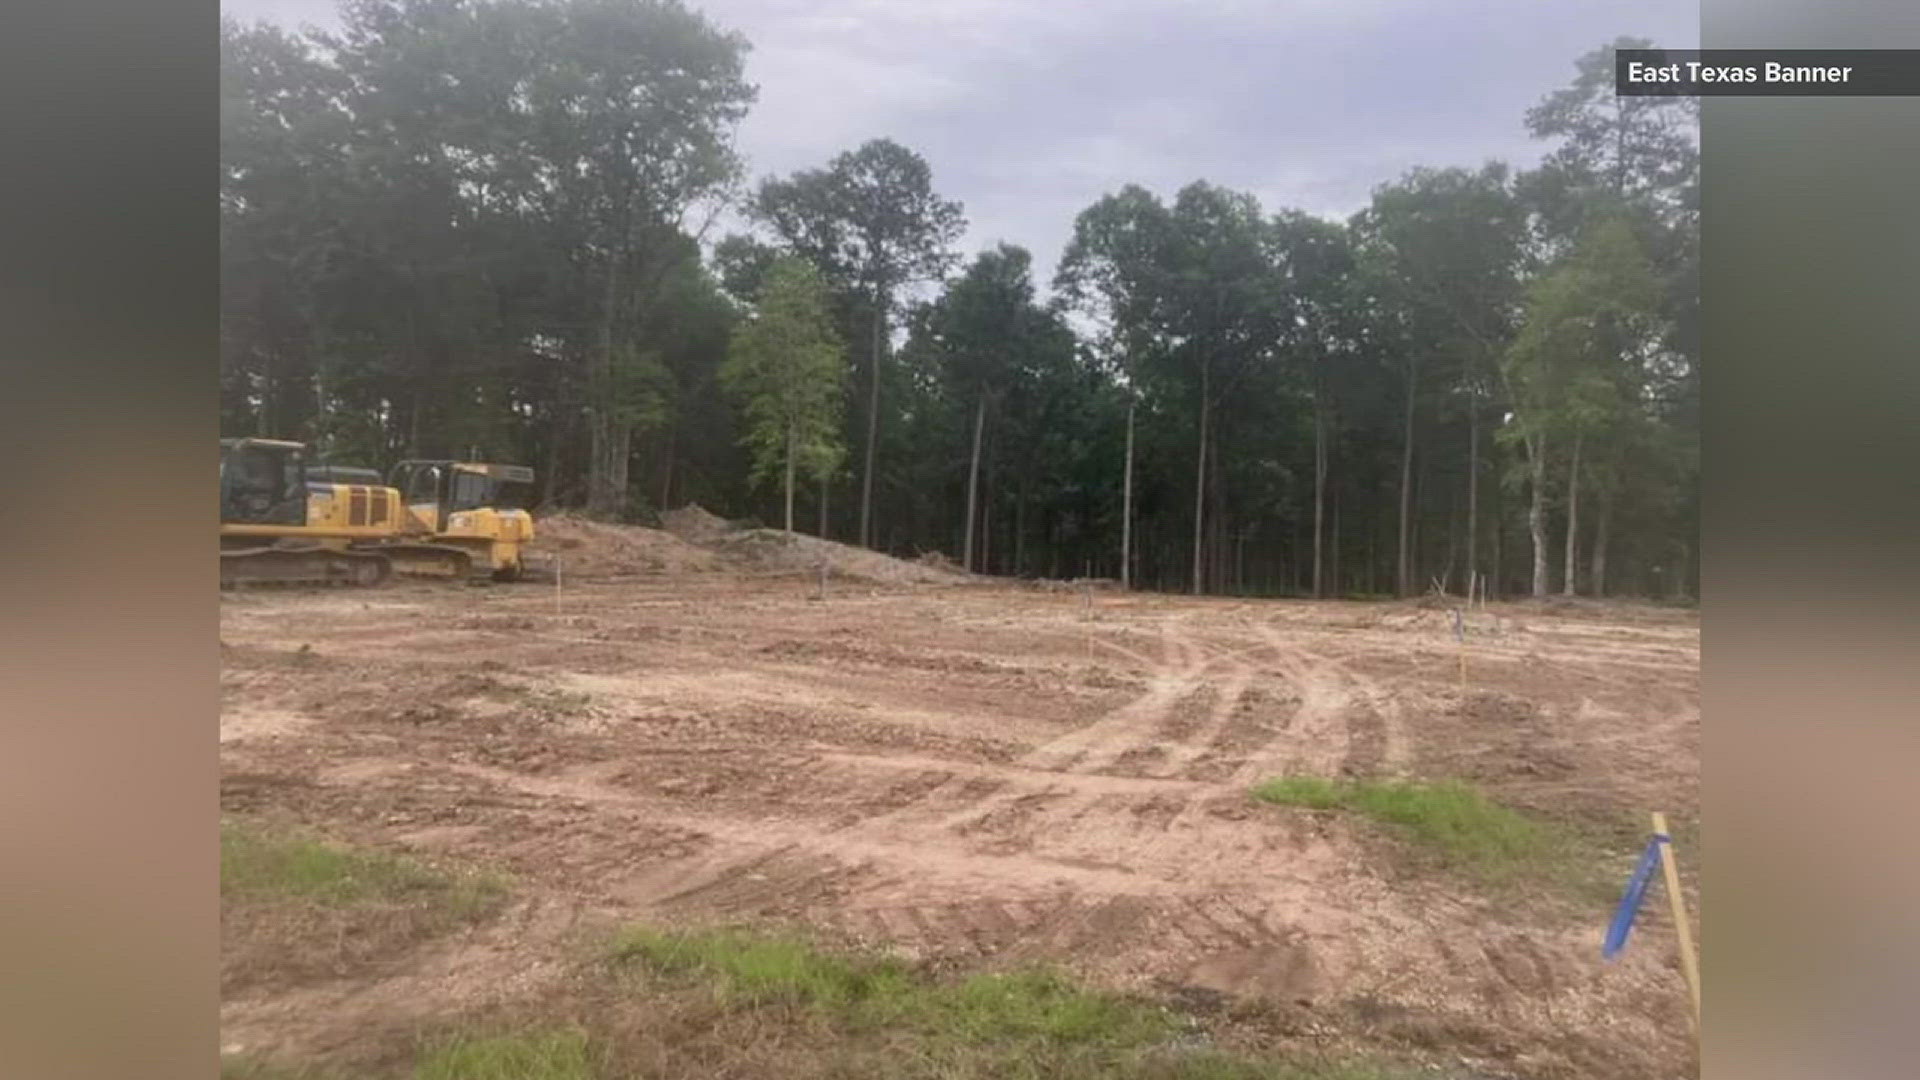 It will include a new landing pad, all under fence and will be more secure. It will be connected to Christus Jasper Memorial Hospital by a covered walkway.